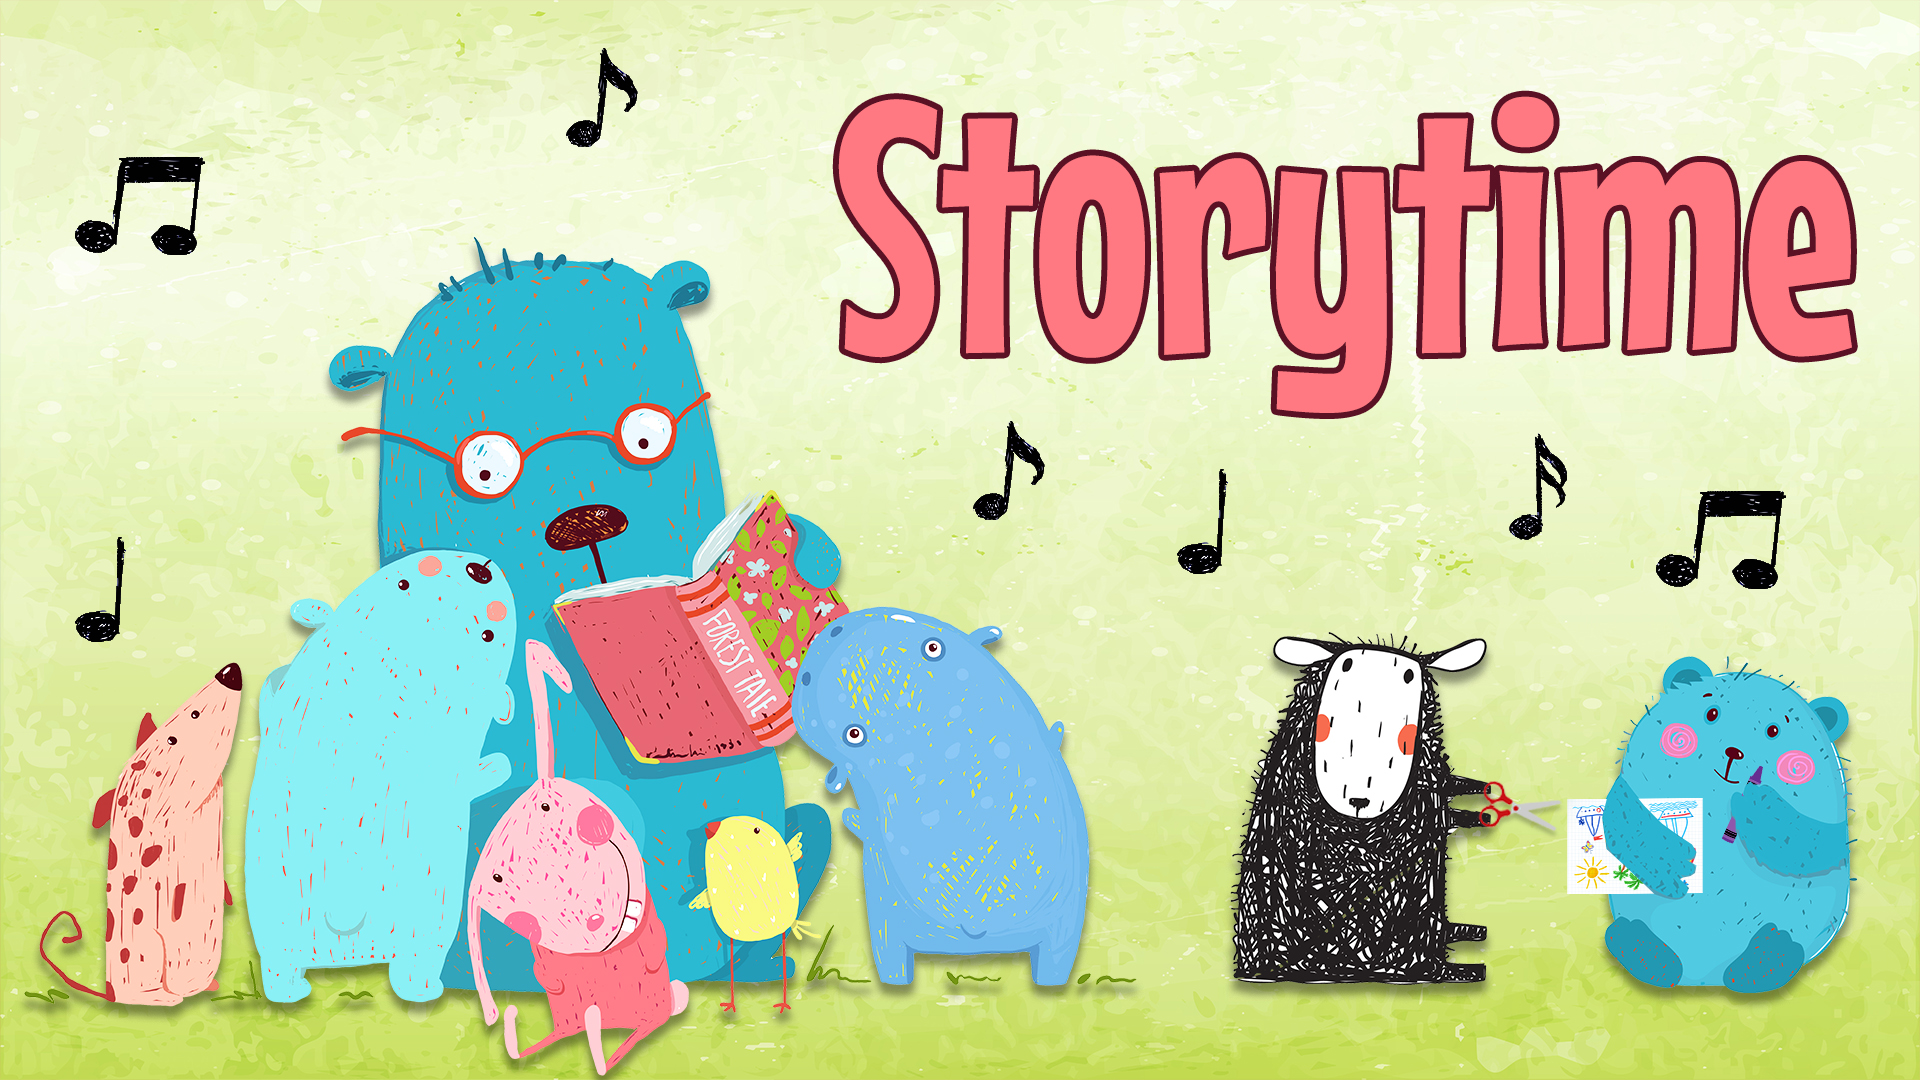 Image reads "Storytime" on a green background. Animals reading take up the bottom half of the picture. There are music notes scattered throughout the image.